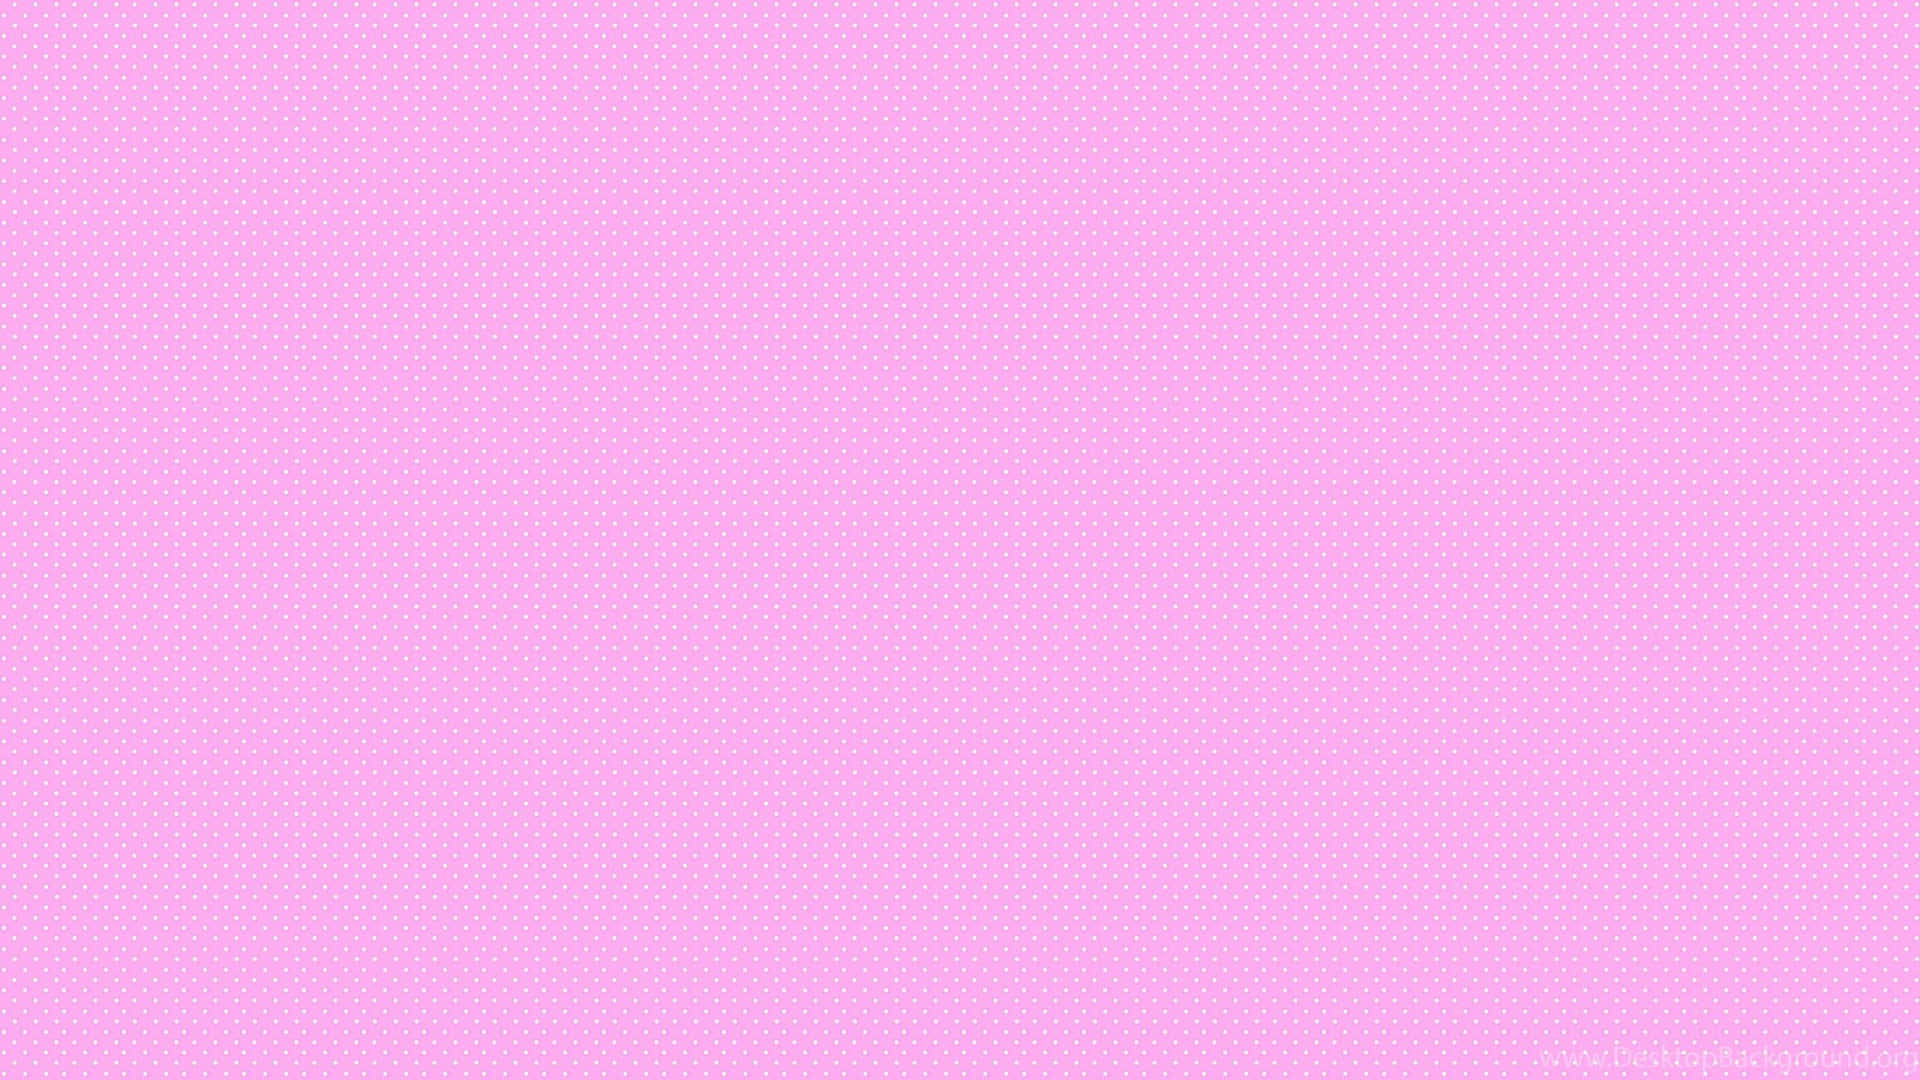 Download A tranquil background featuring a light pink gradient ...